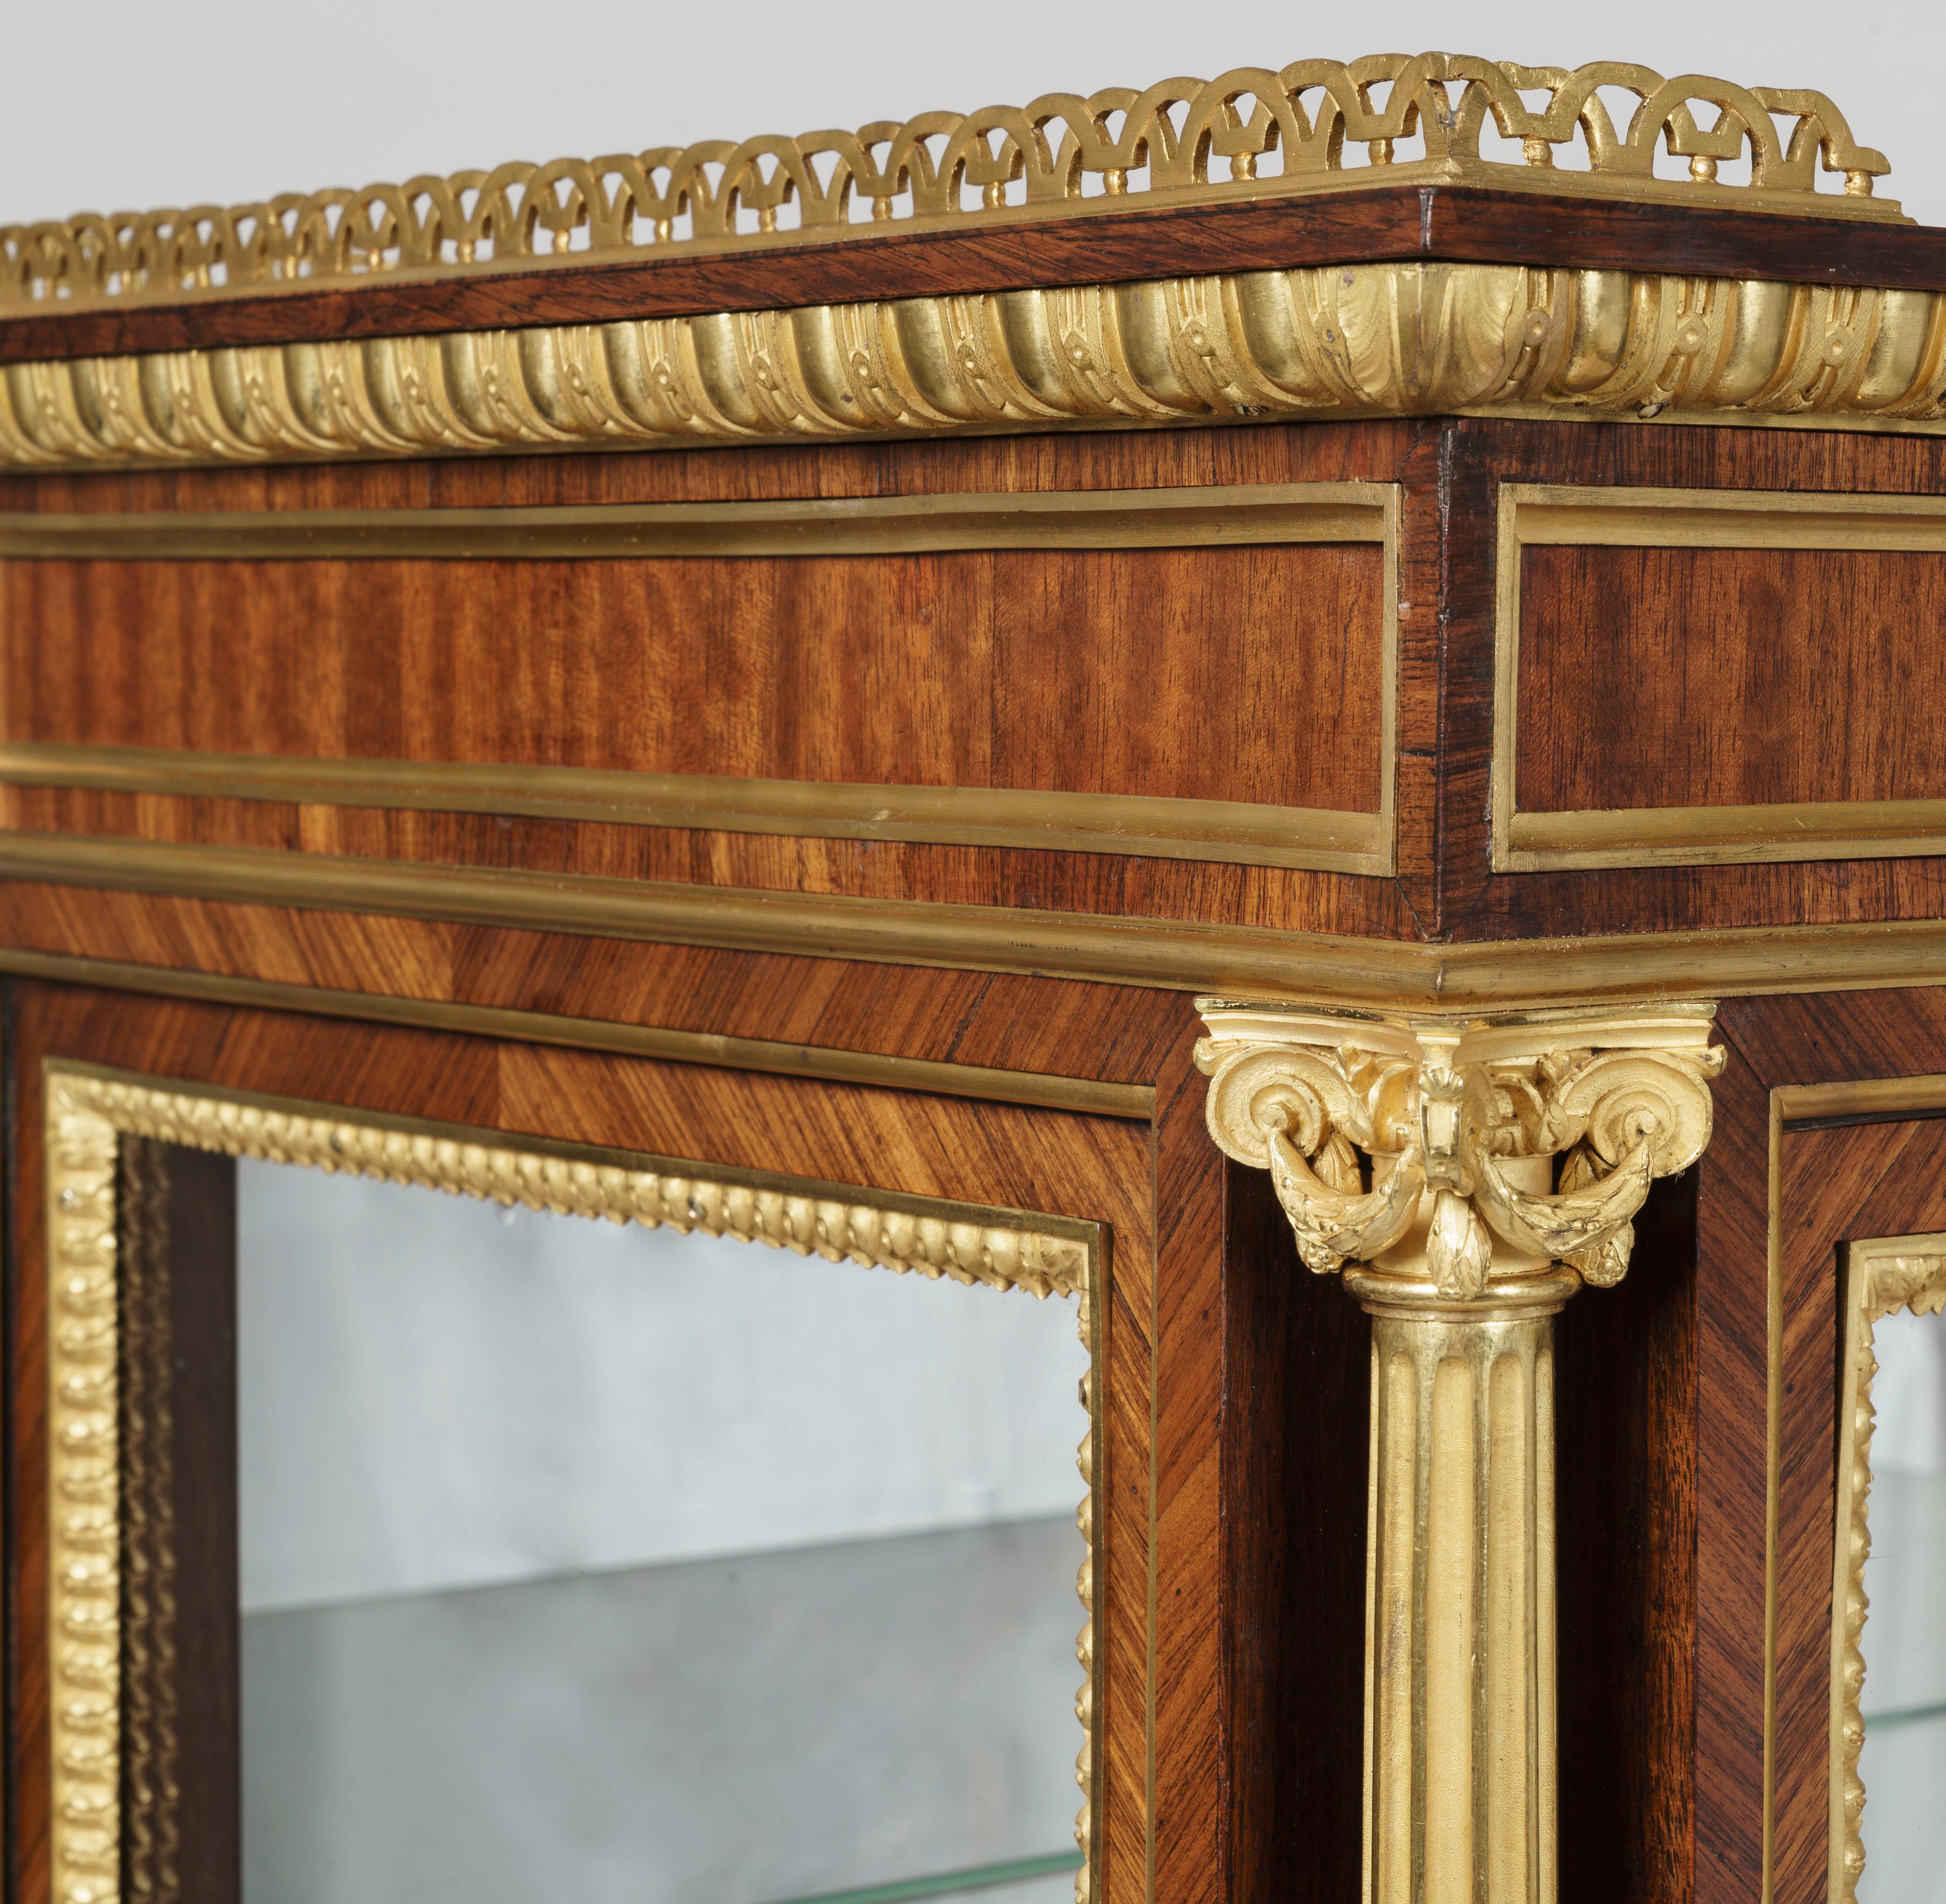 Kingwood Pair of Display Cabinets in the Louis XVI Style For Sale